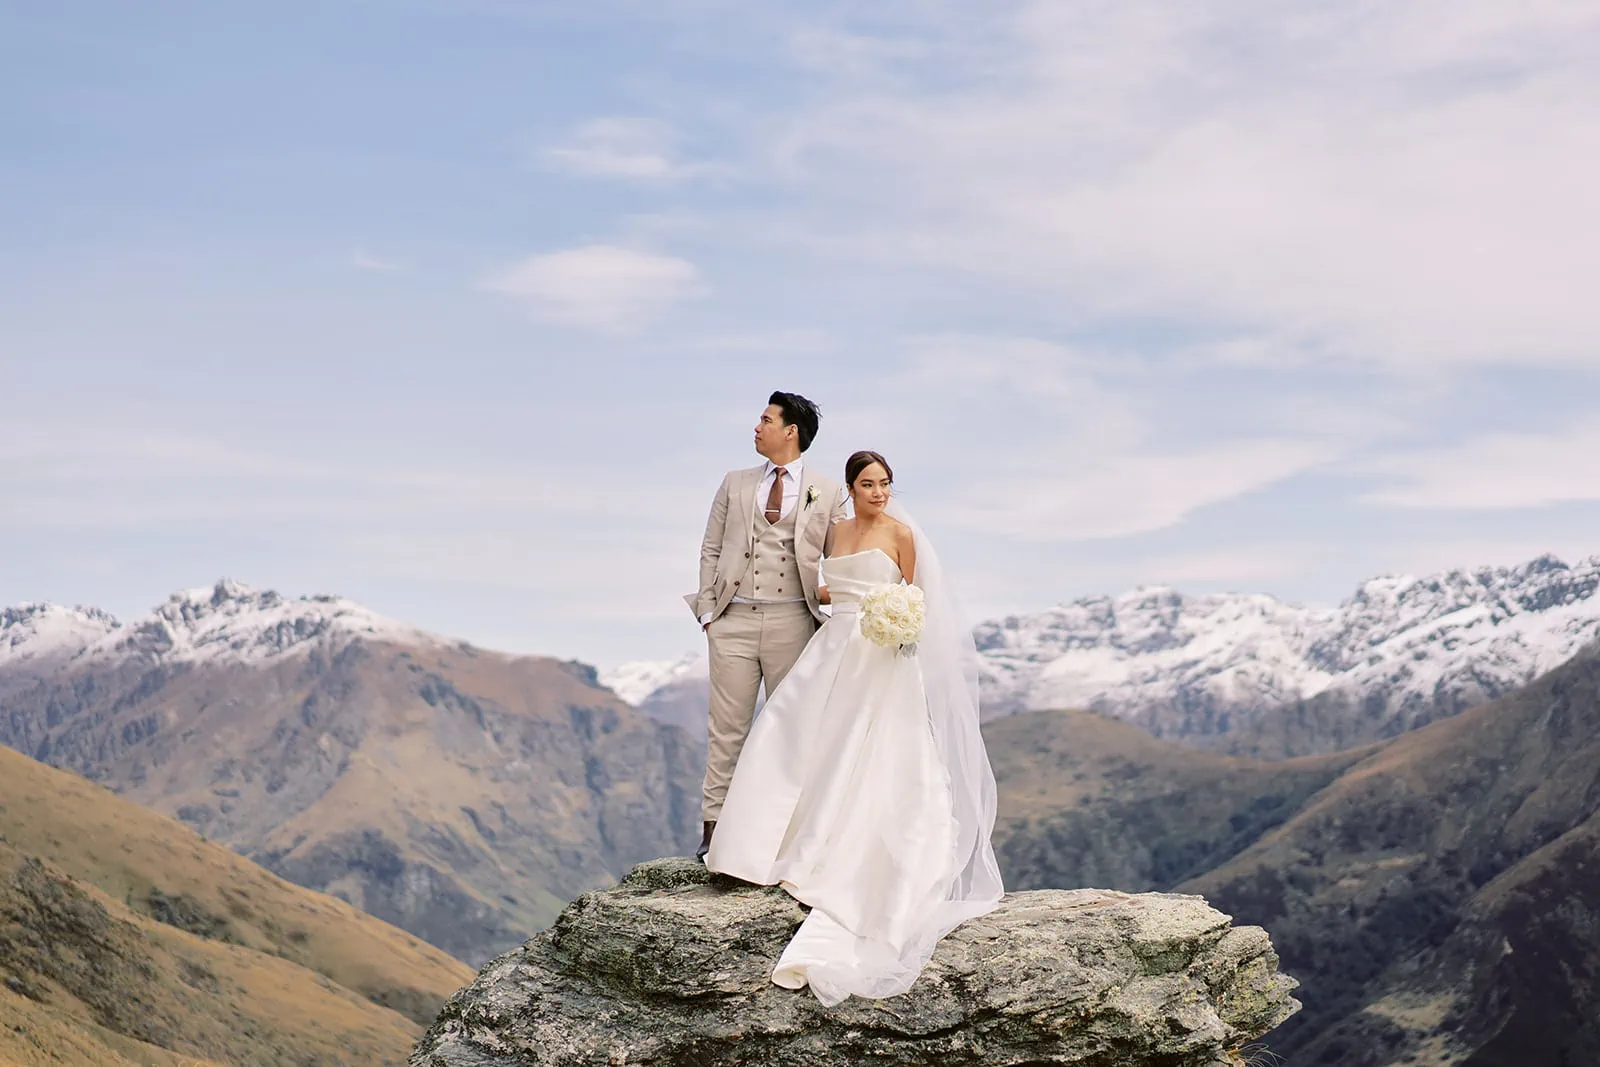 Queenstown Elopement Heli Wedding Photographer クイーンズタウン結婚式 | A man and woman standing on a rock with mountains in the background in Queenstown.